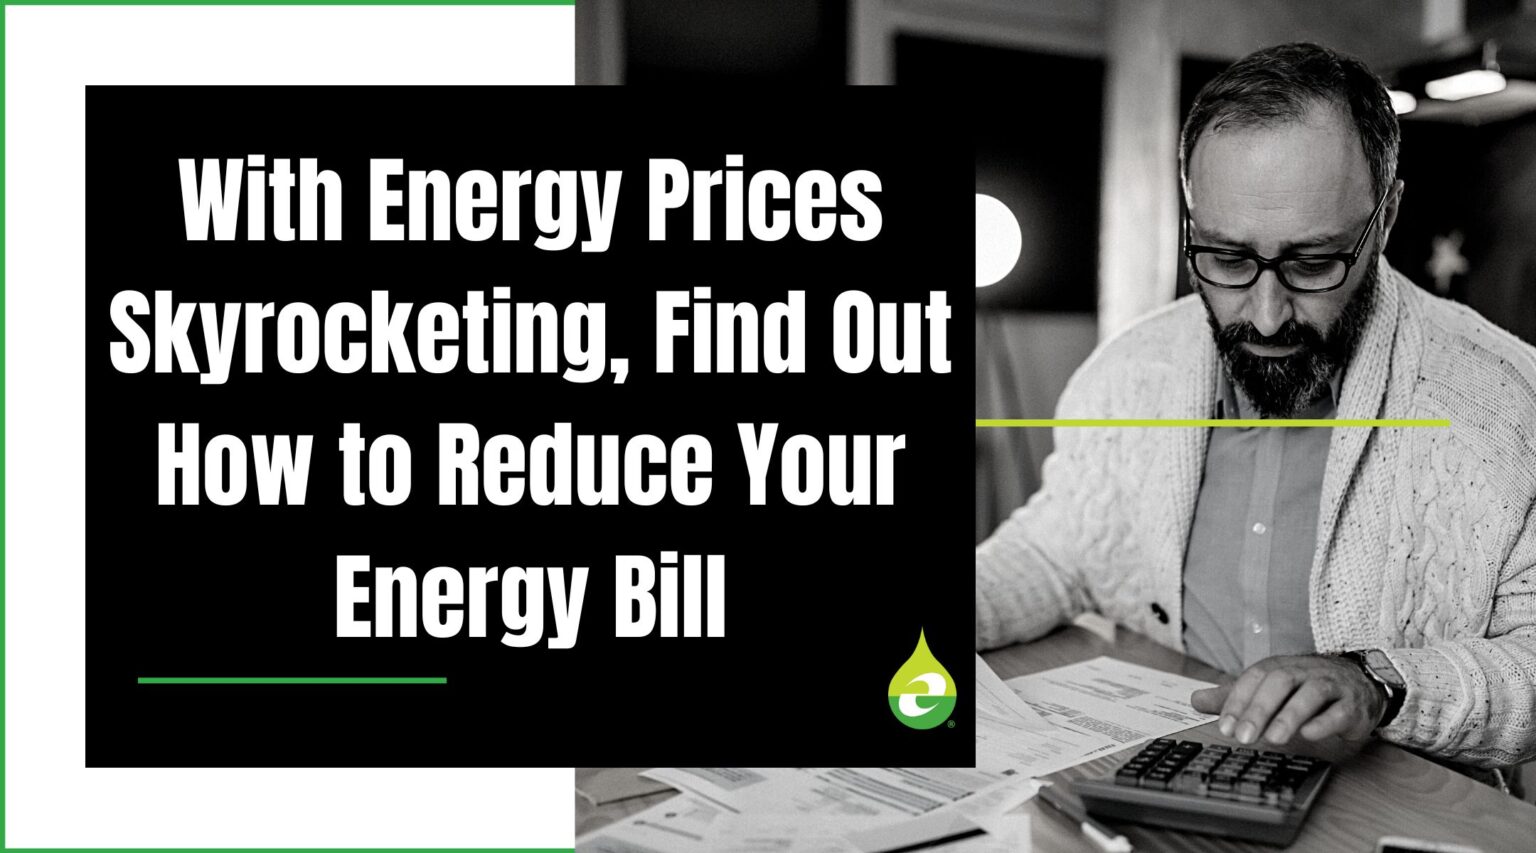 With Energy Prices Skyrocketing, Find Out How to Reduce Your Energy Bill